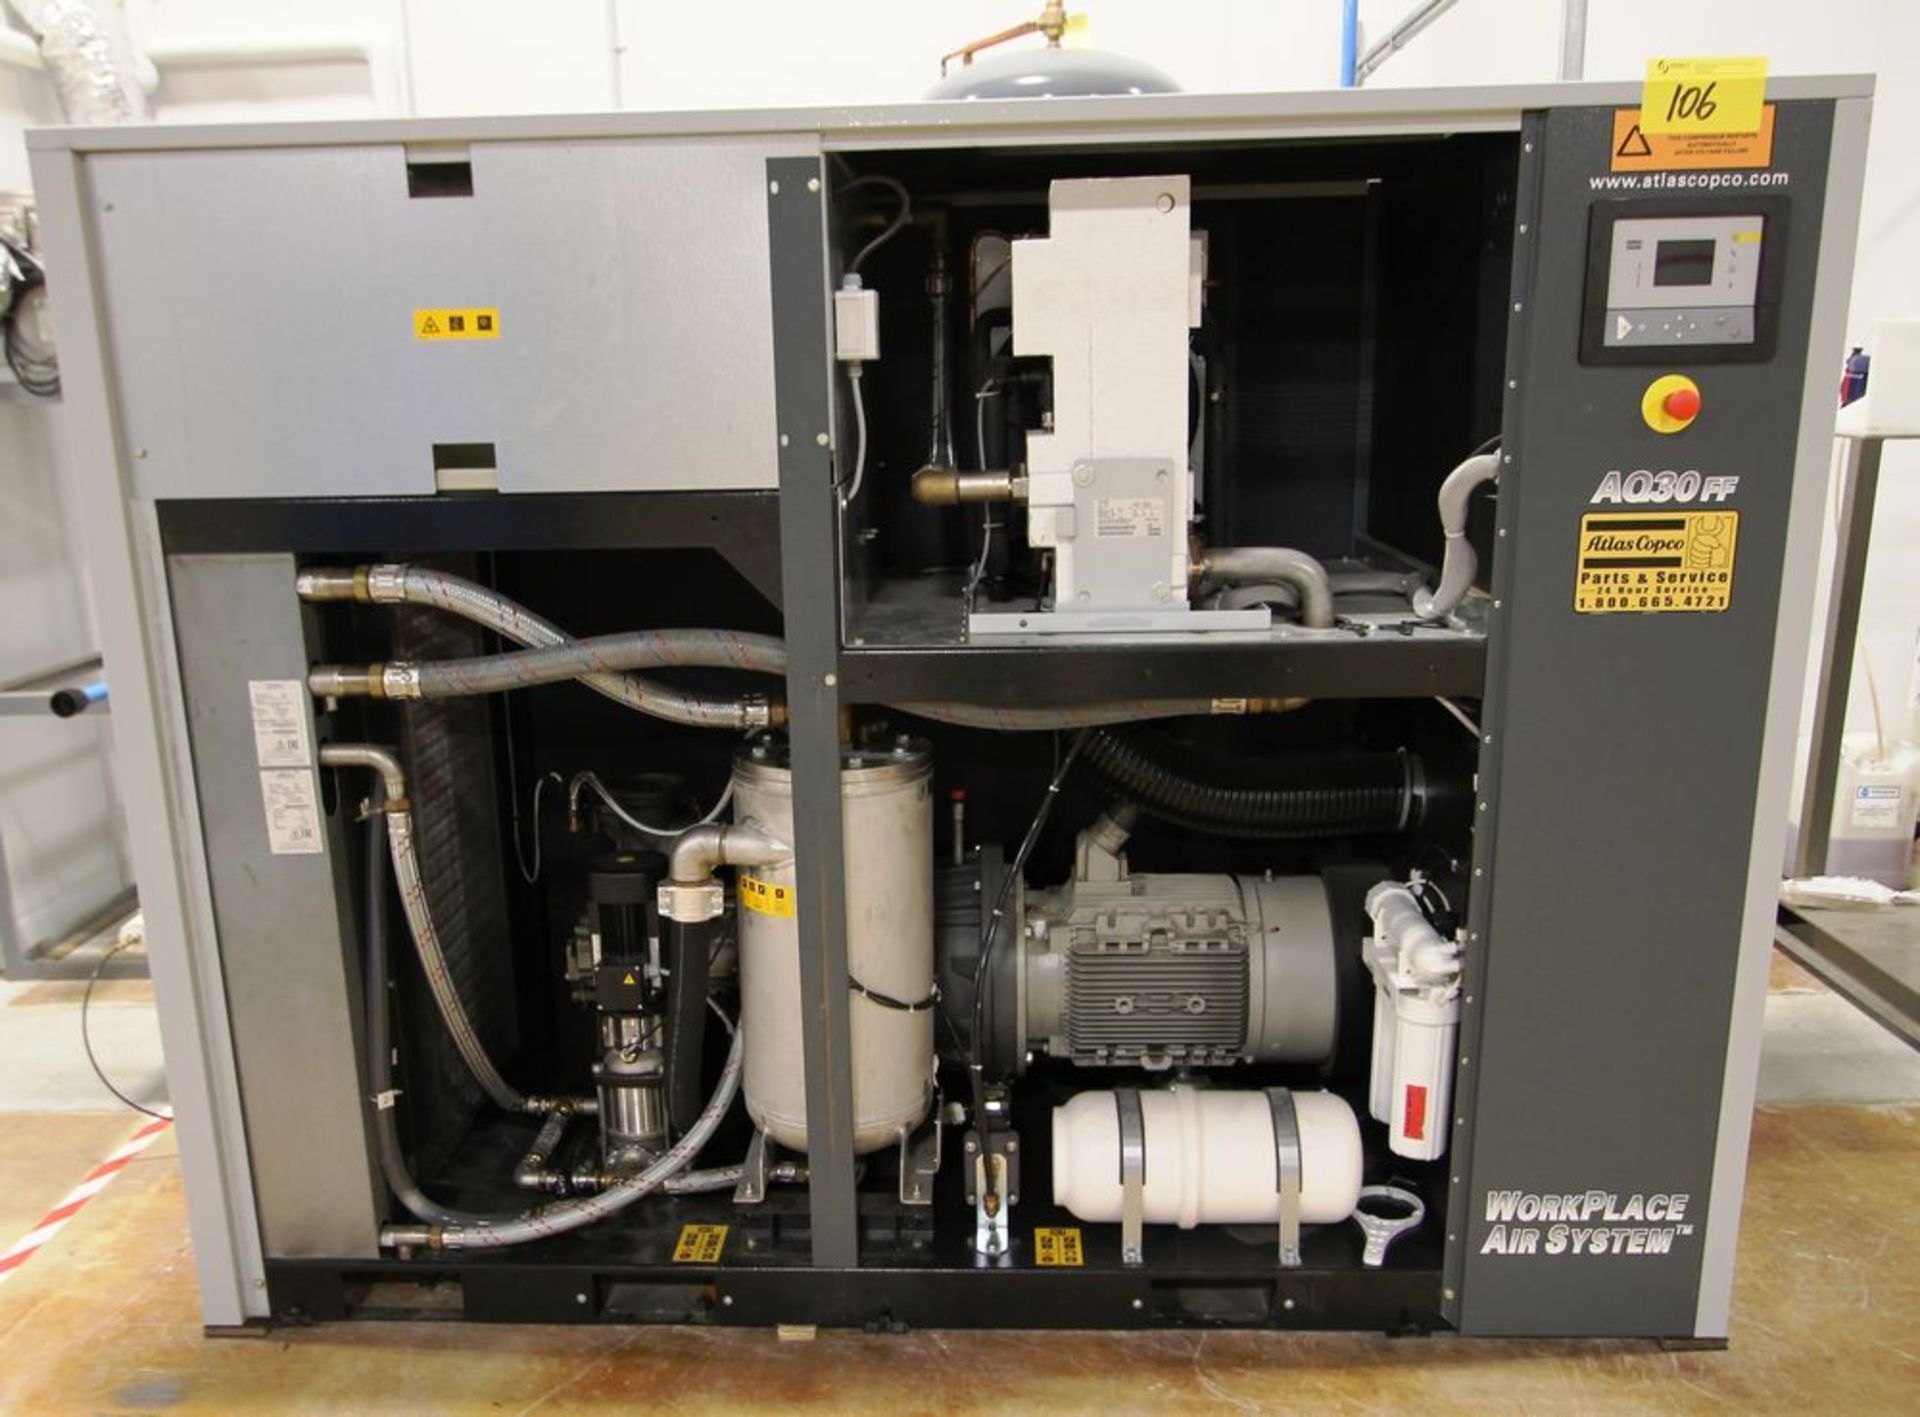 2016 ATLAS COPCO AQ30 WORK PLACE AIR SYSTEM AIR COMPRESSOR, OIL FREE, ISO 8573-1, CLASS B, 40HP, - Image 11 of 21